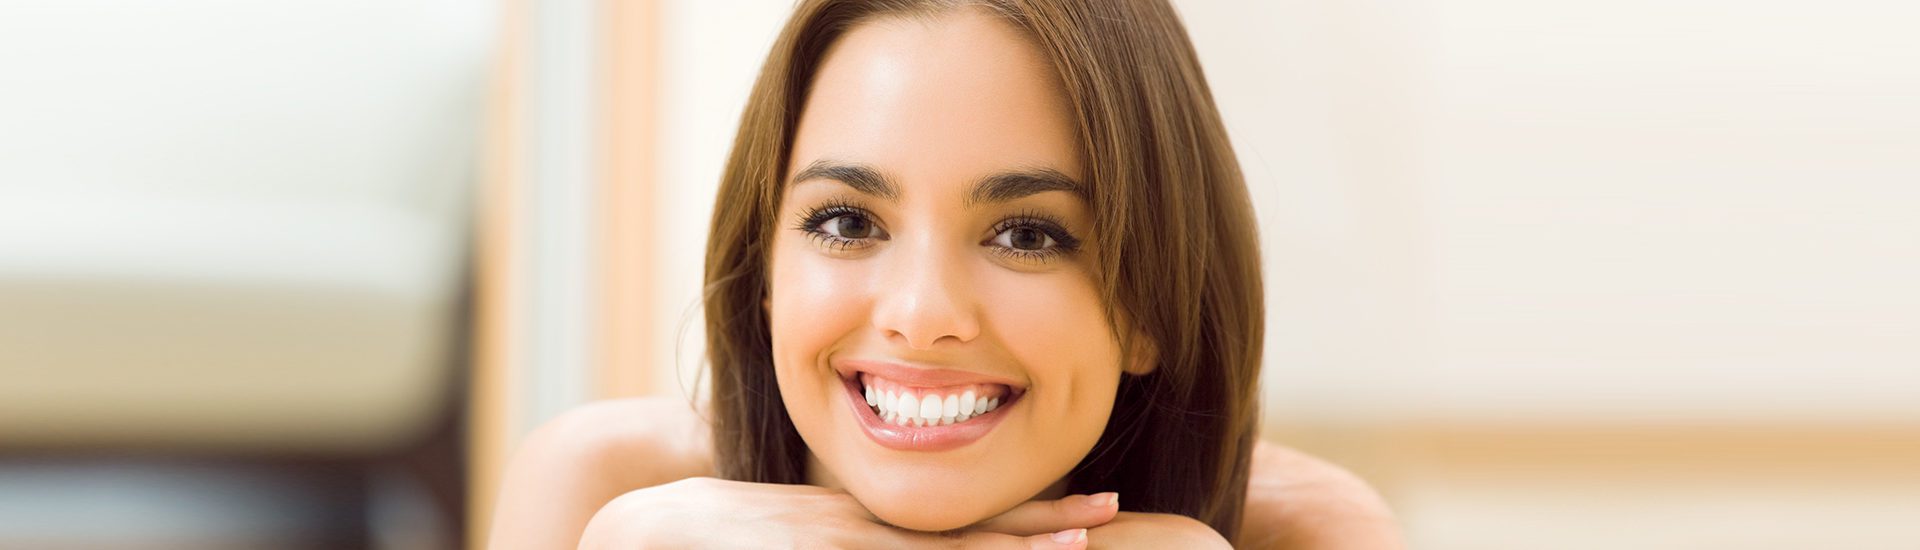 Girl Happy with their cosmetic dental treatment